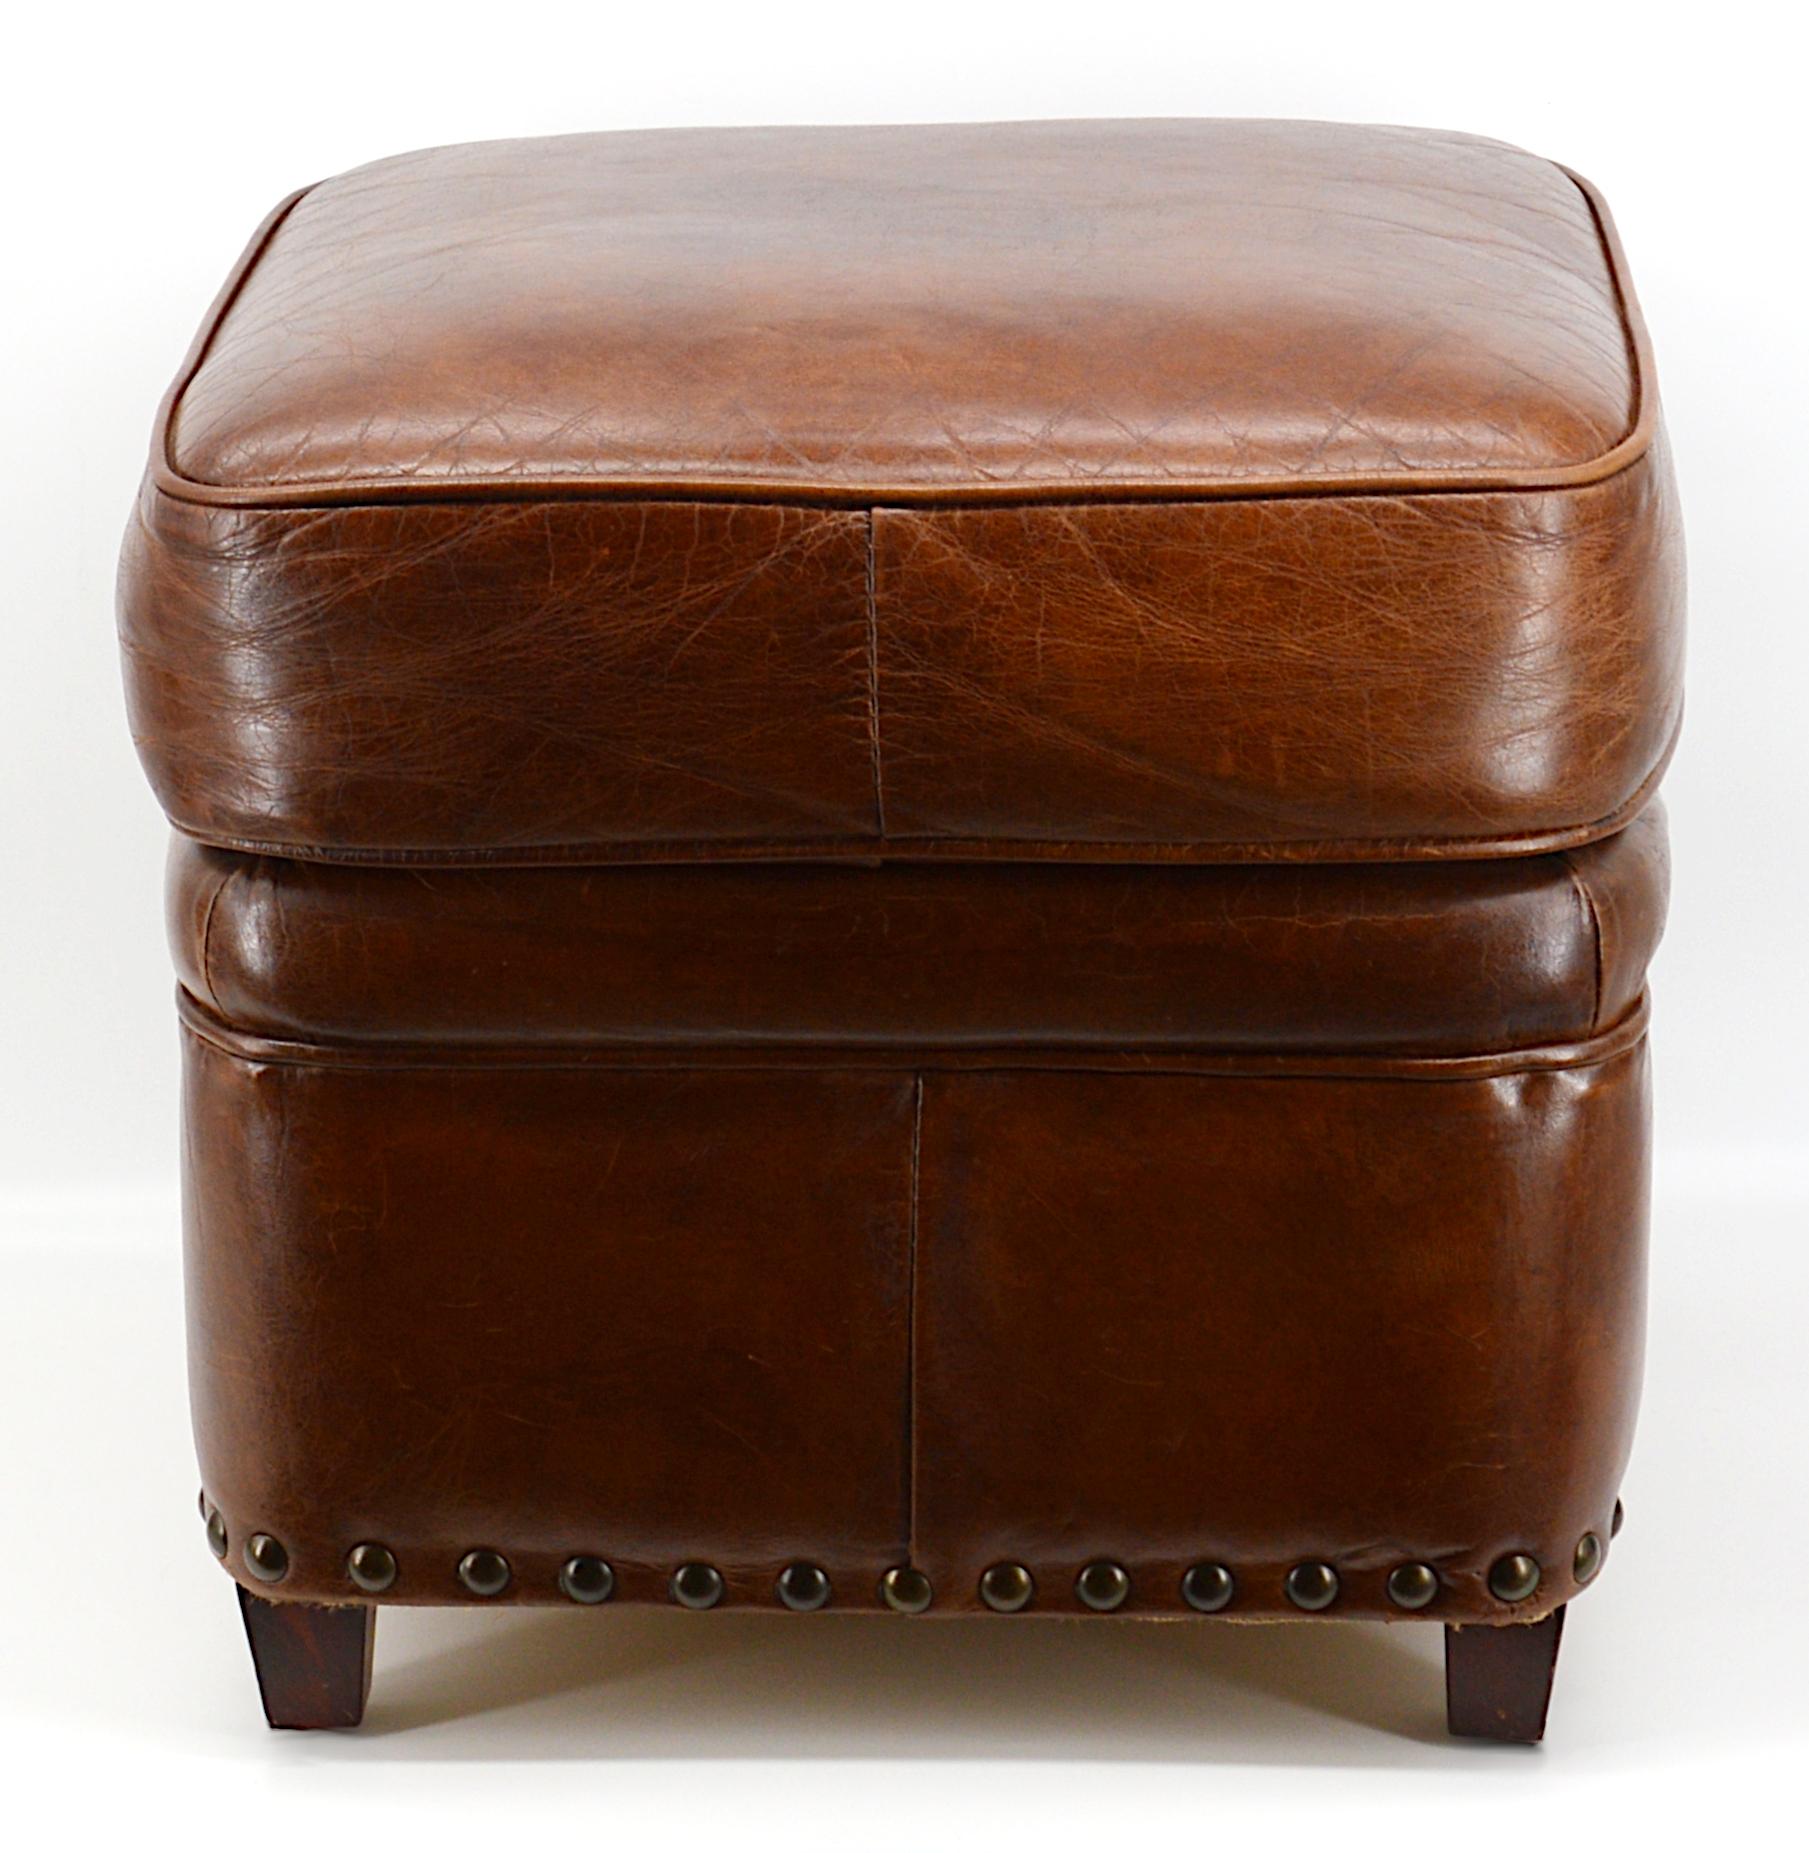 Modern stool bench upholstered with leather. Four wooden feet. Beautiful patina.